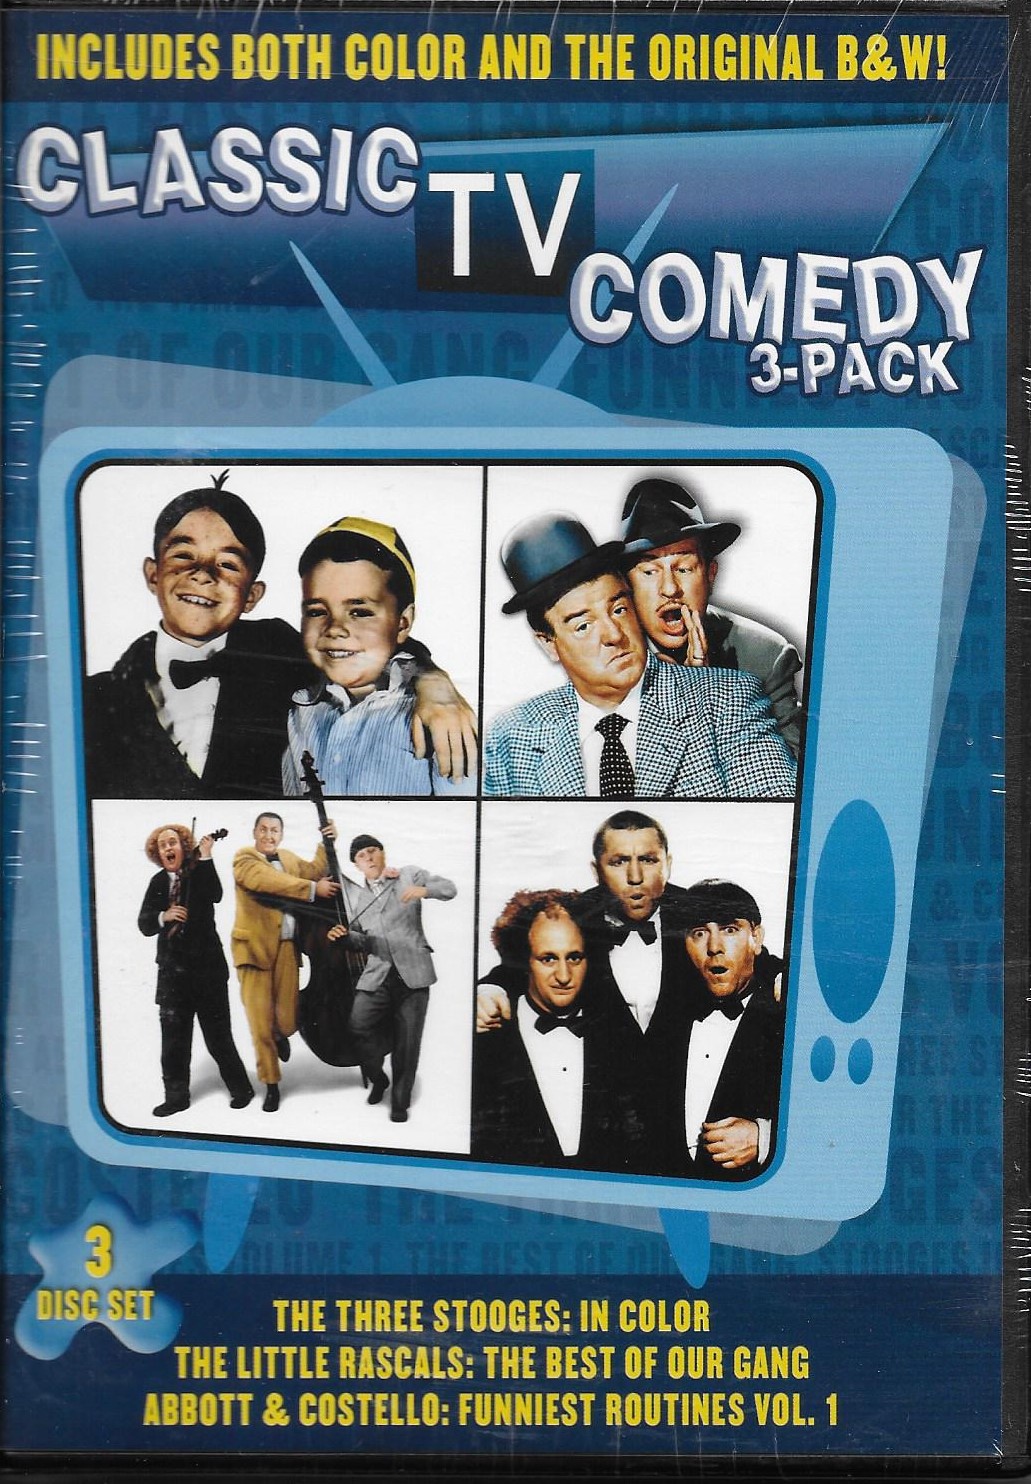 CLASSIC COMEDY 3-PACK